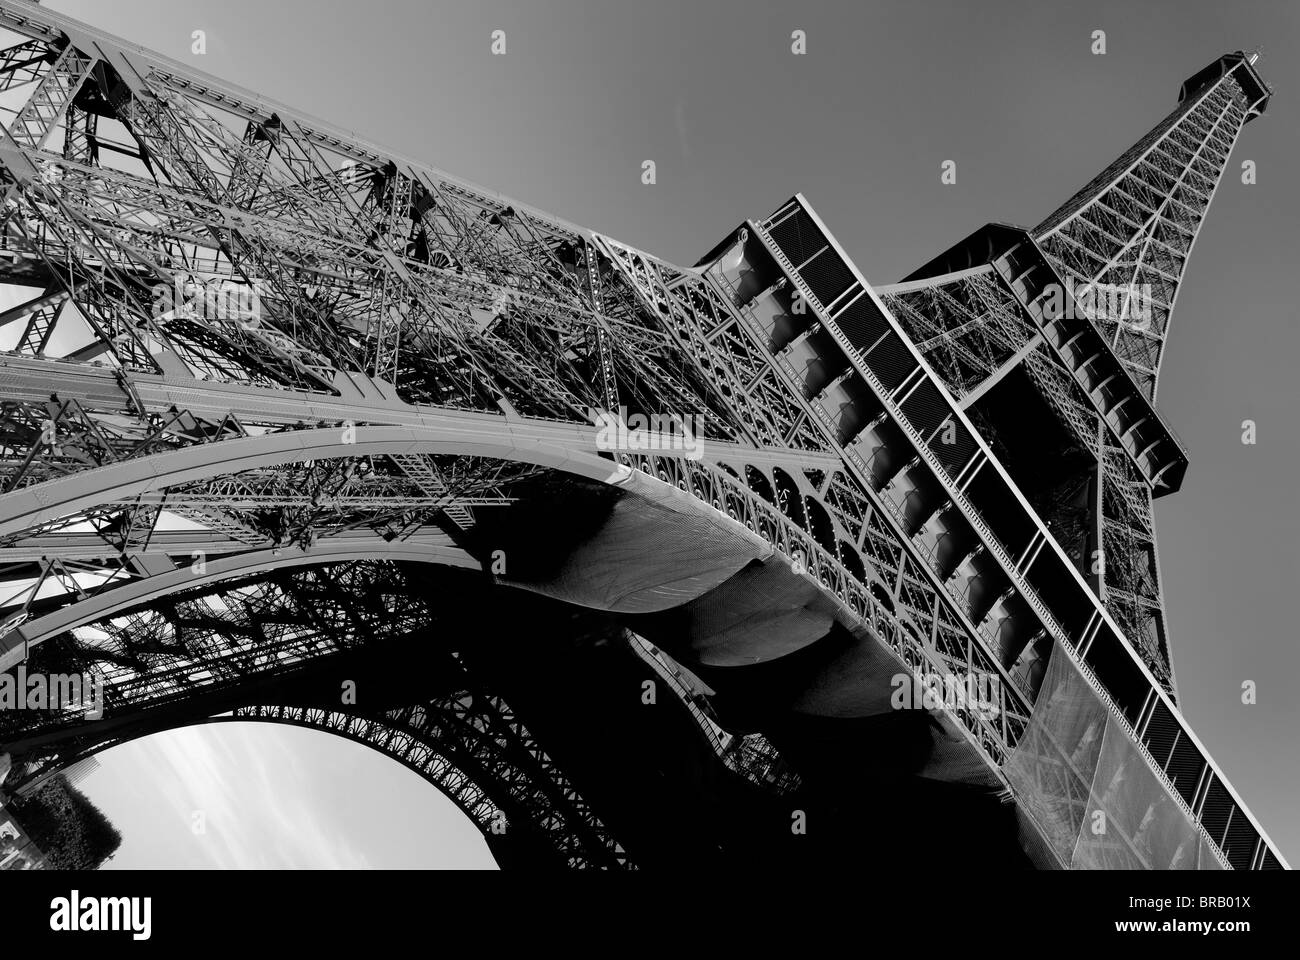 The Eiffel Tower in Black and White, Paris France. Stock Photo